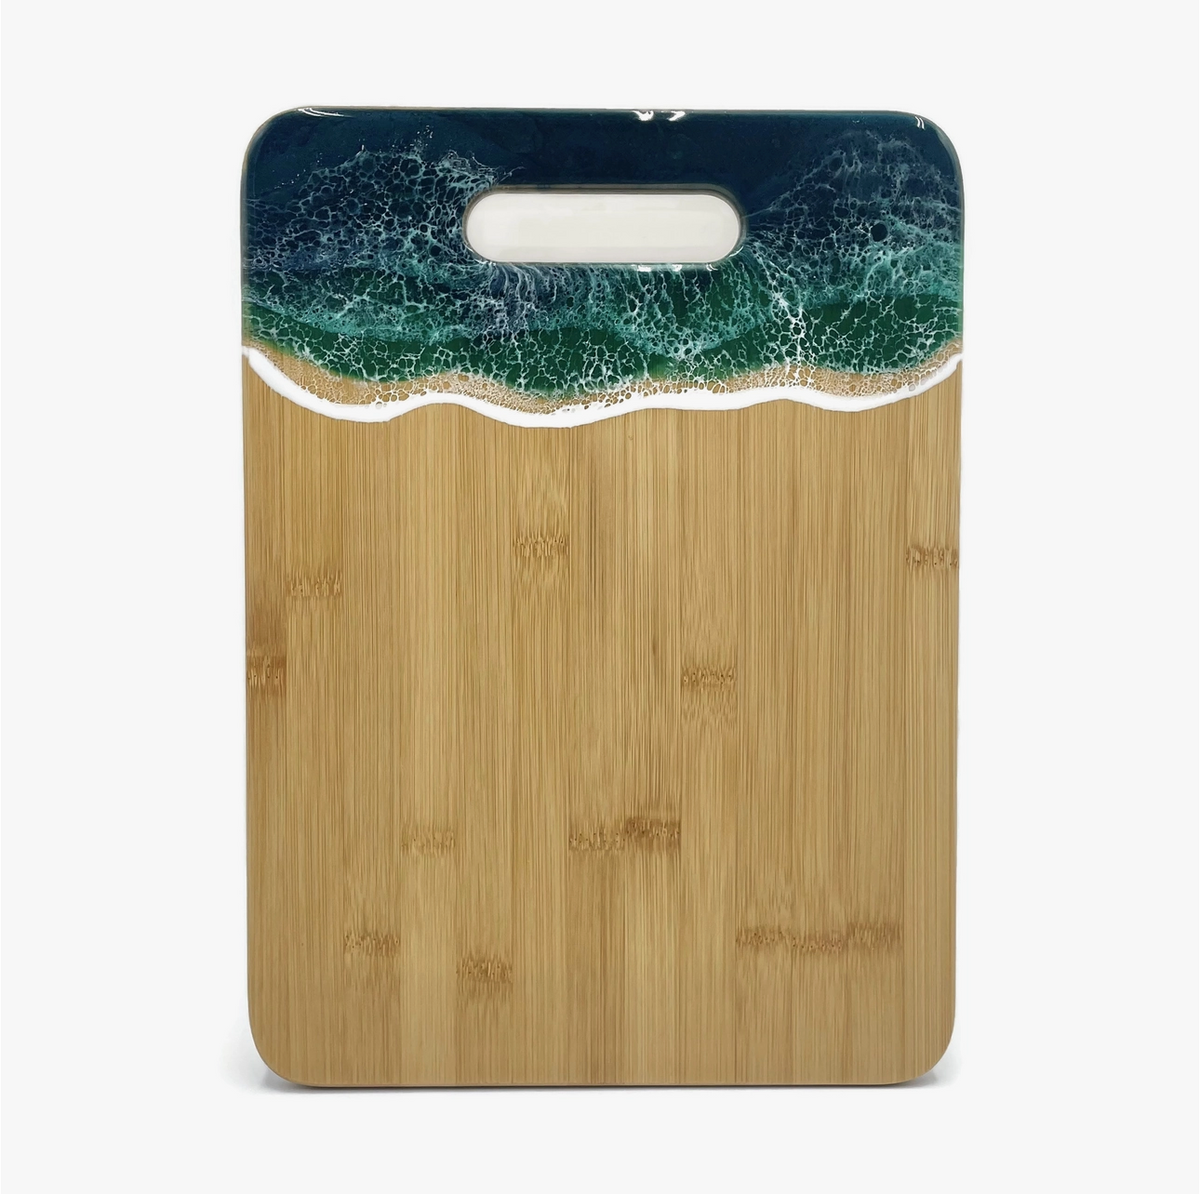 Large Cutting Board in Ocean Blue - Heart of the Home LV